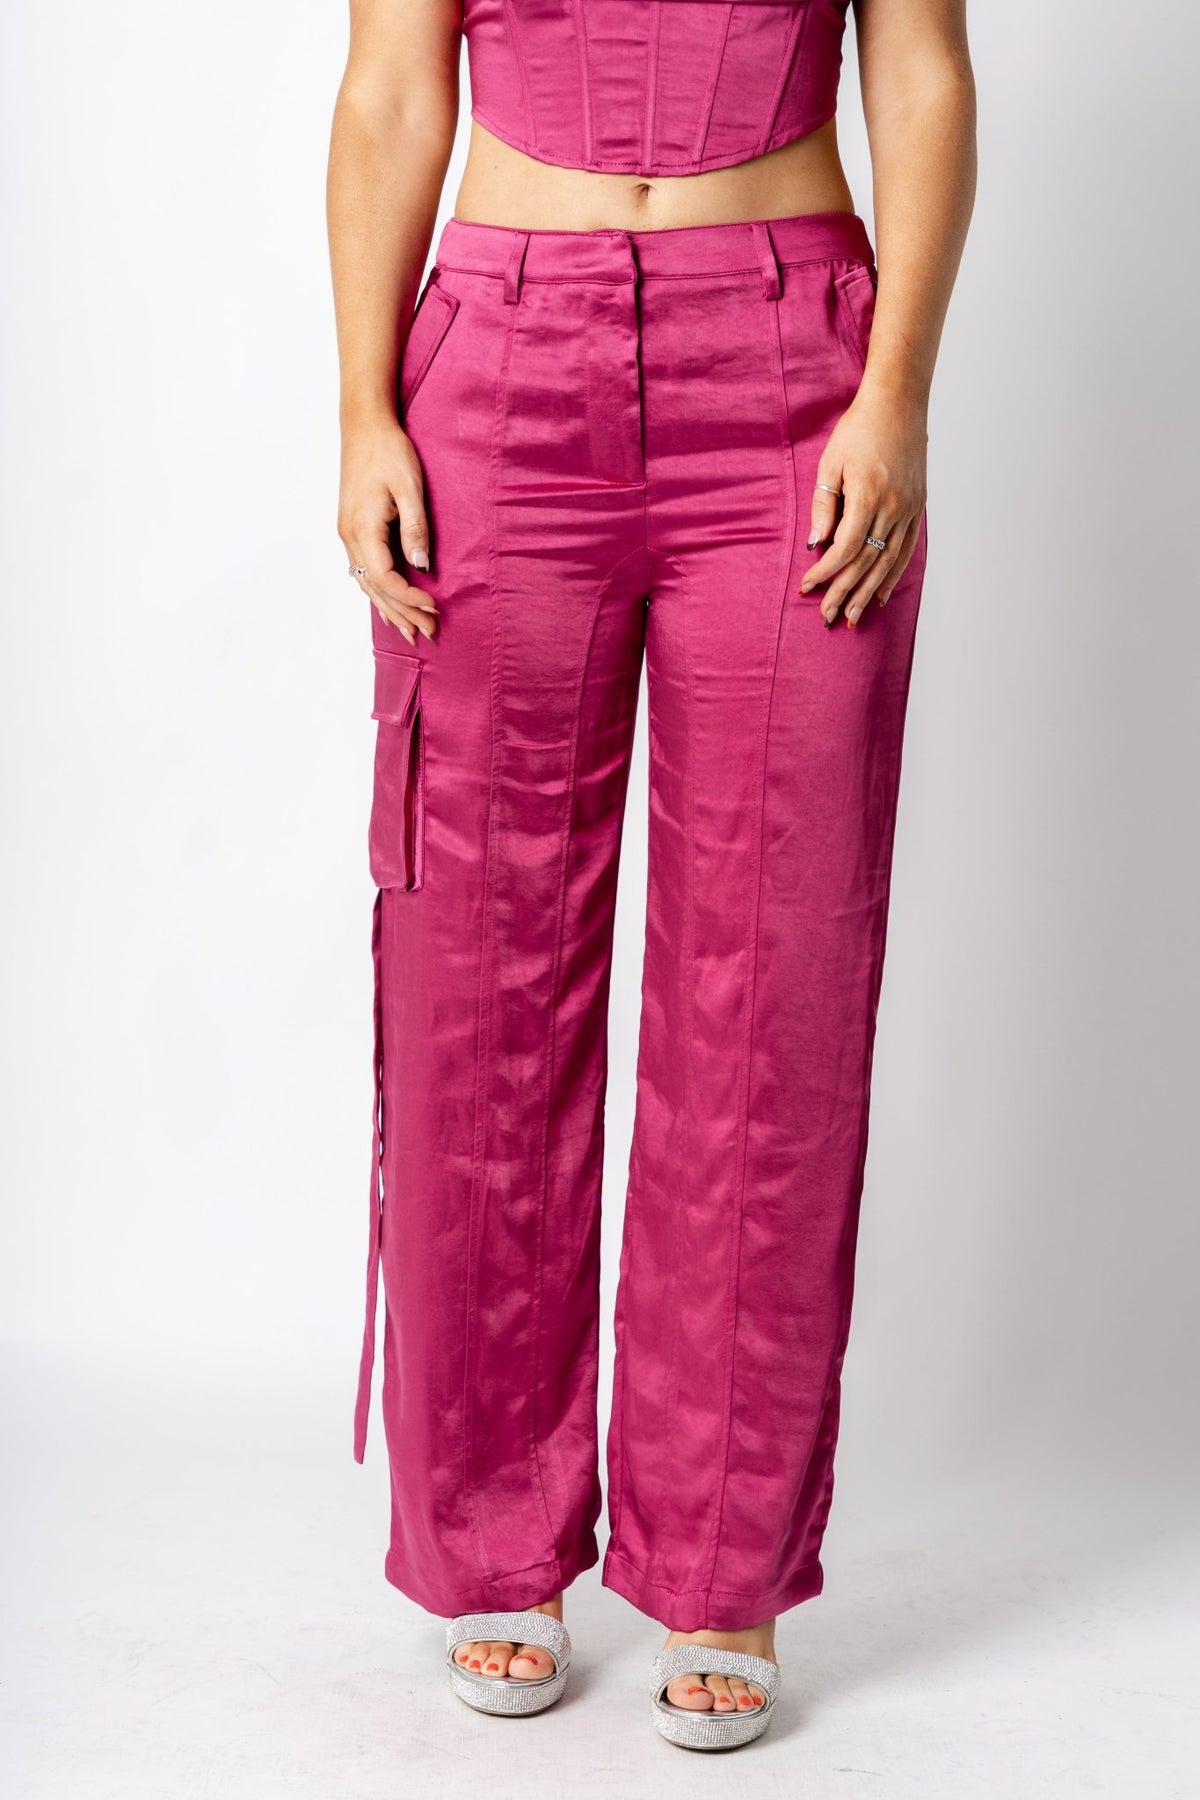 Satin wide leg cargo pants plum - Trendy Holiday Apparel at Lush Fashion Lounge Boutique in Oklahoma City